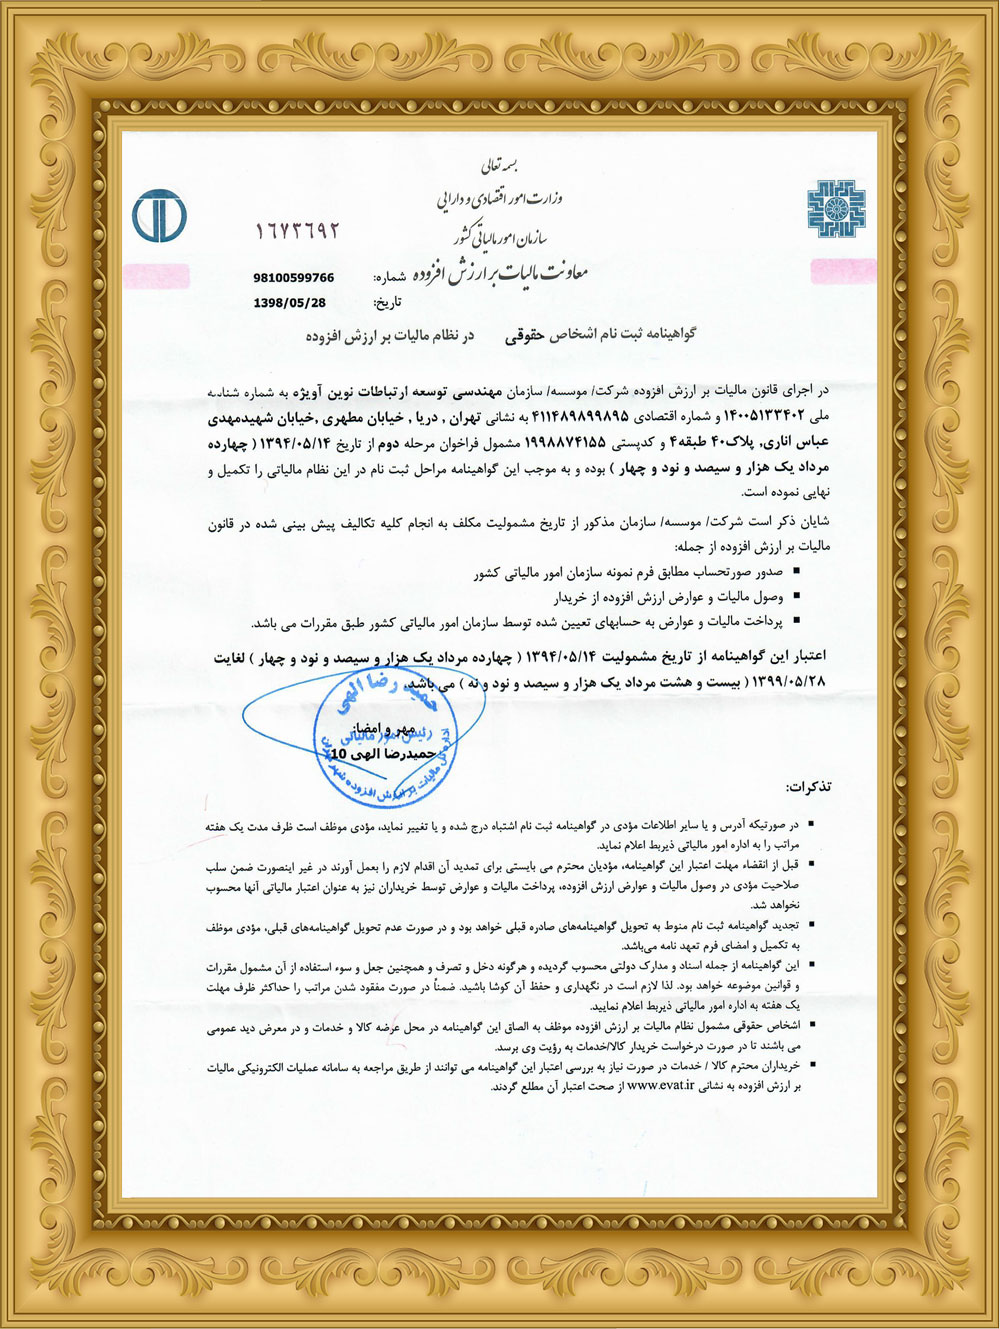 Value added certificate